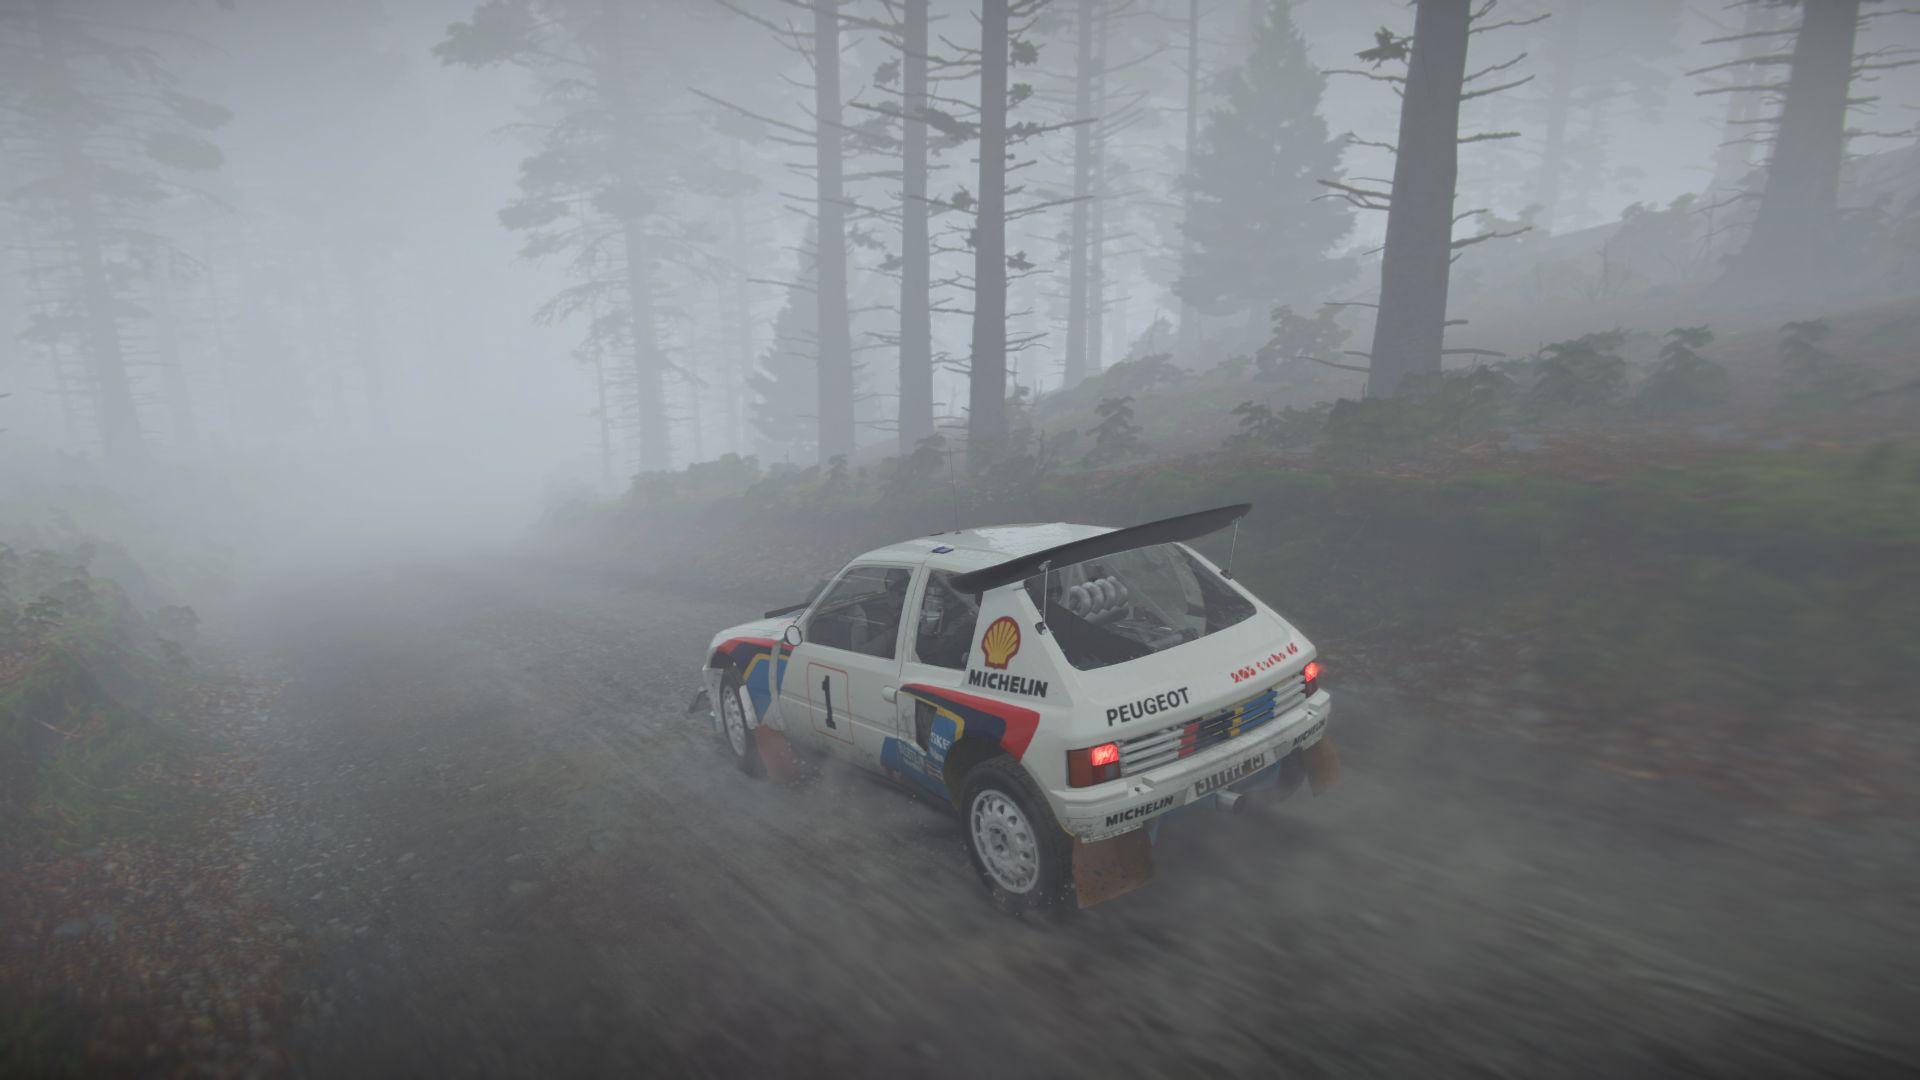 720p dirt rally background